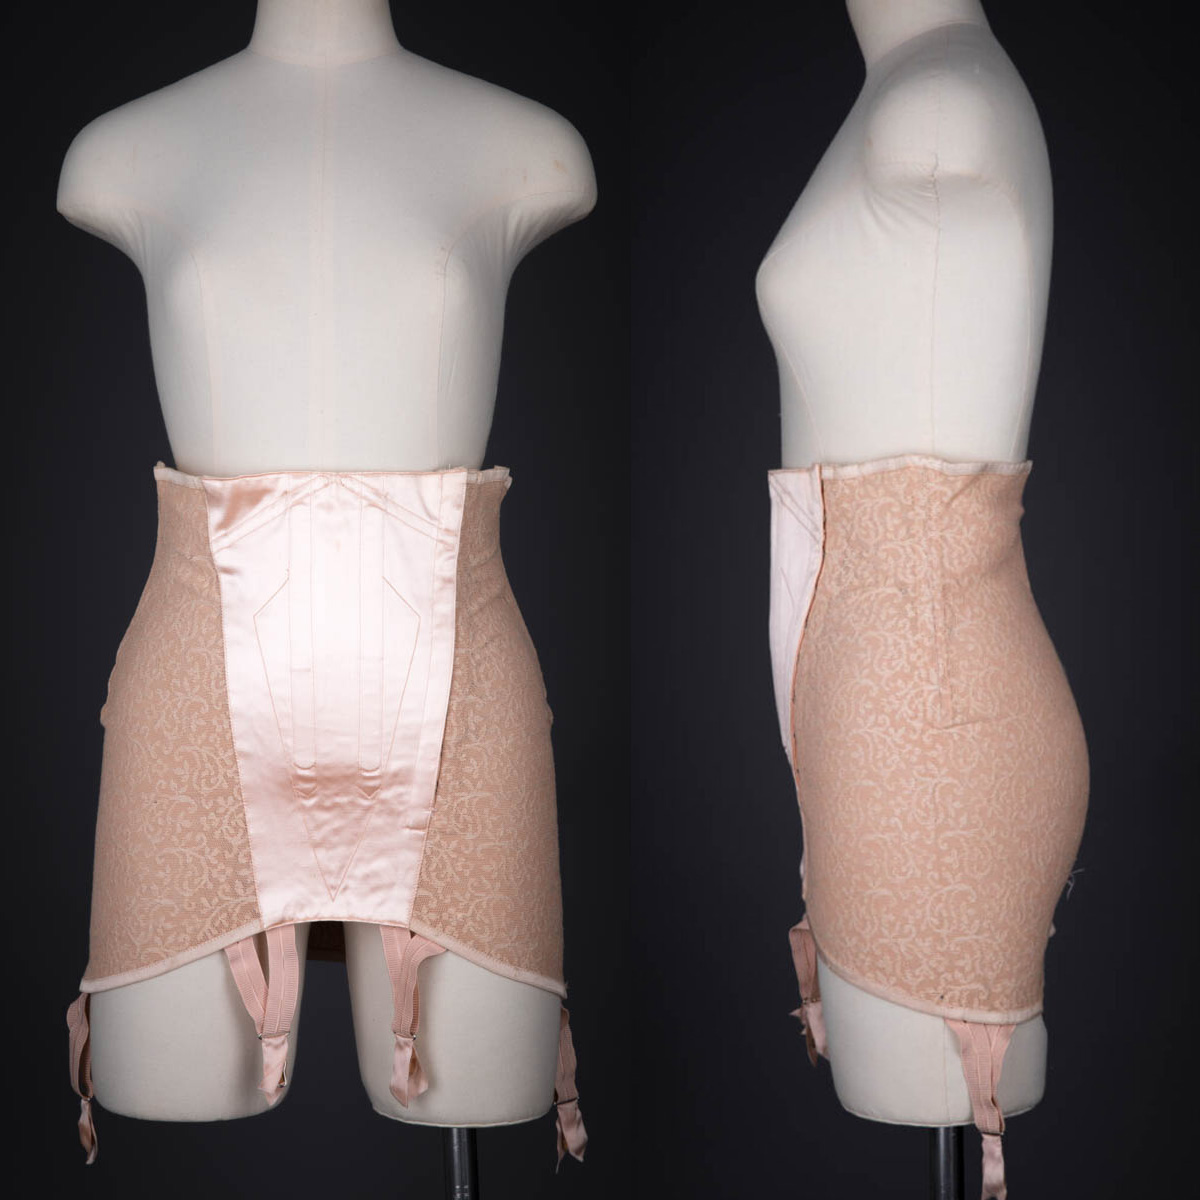 New to our digital collection, this c. 1950s quilted satin and embroidered stretch tulle girdle is typical of undergarments of that decade, providing a smooth base and a nipped-in waist to suit the fashionable hourglass silhouette. underpinningsmuseum.com/museum-collect…